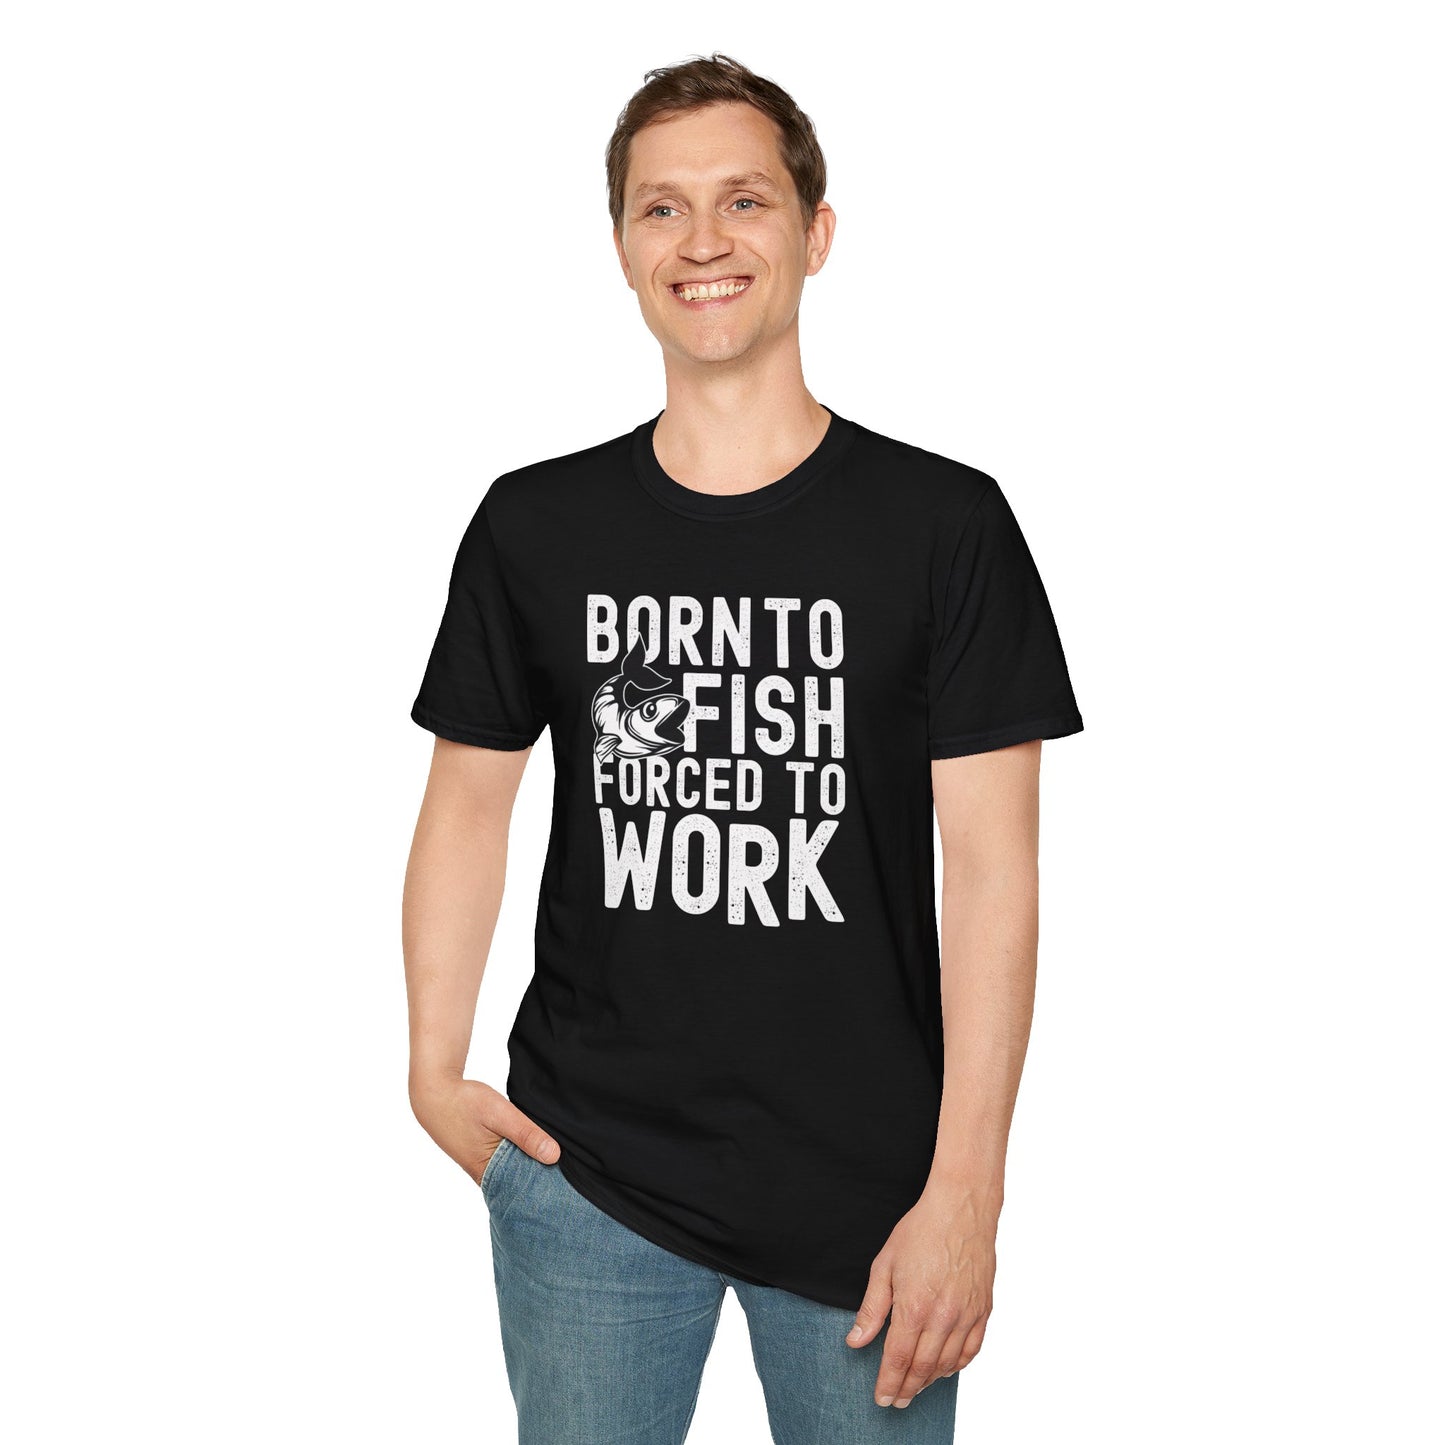 Born To Fish Forced to Work T-Shirts: Embrace Your Passion in Style!